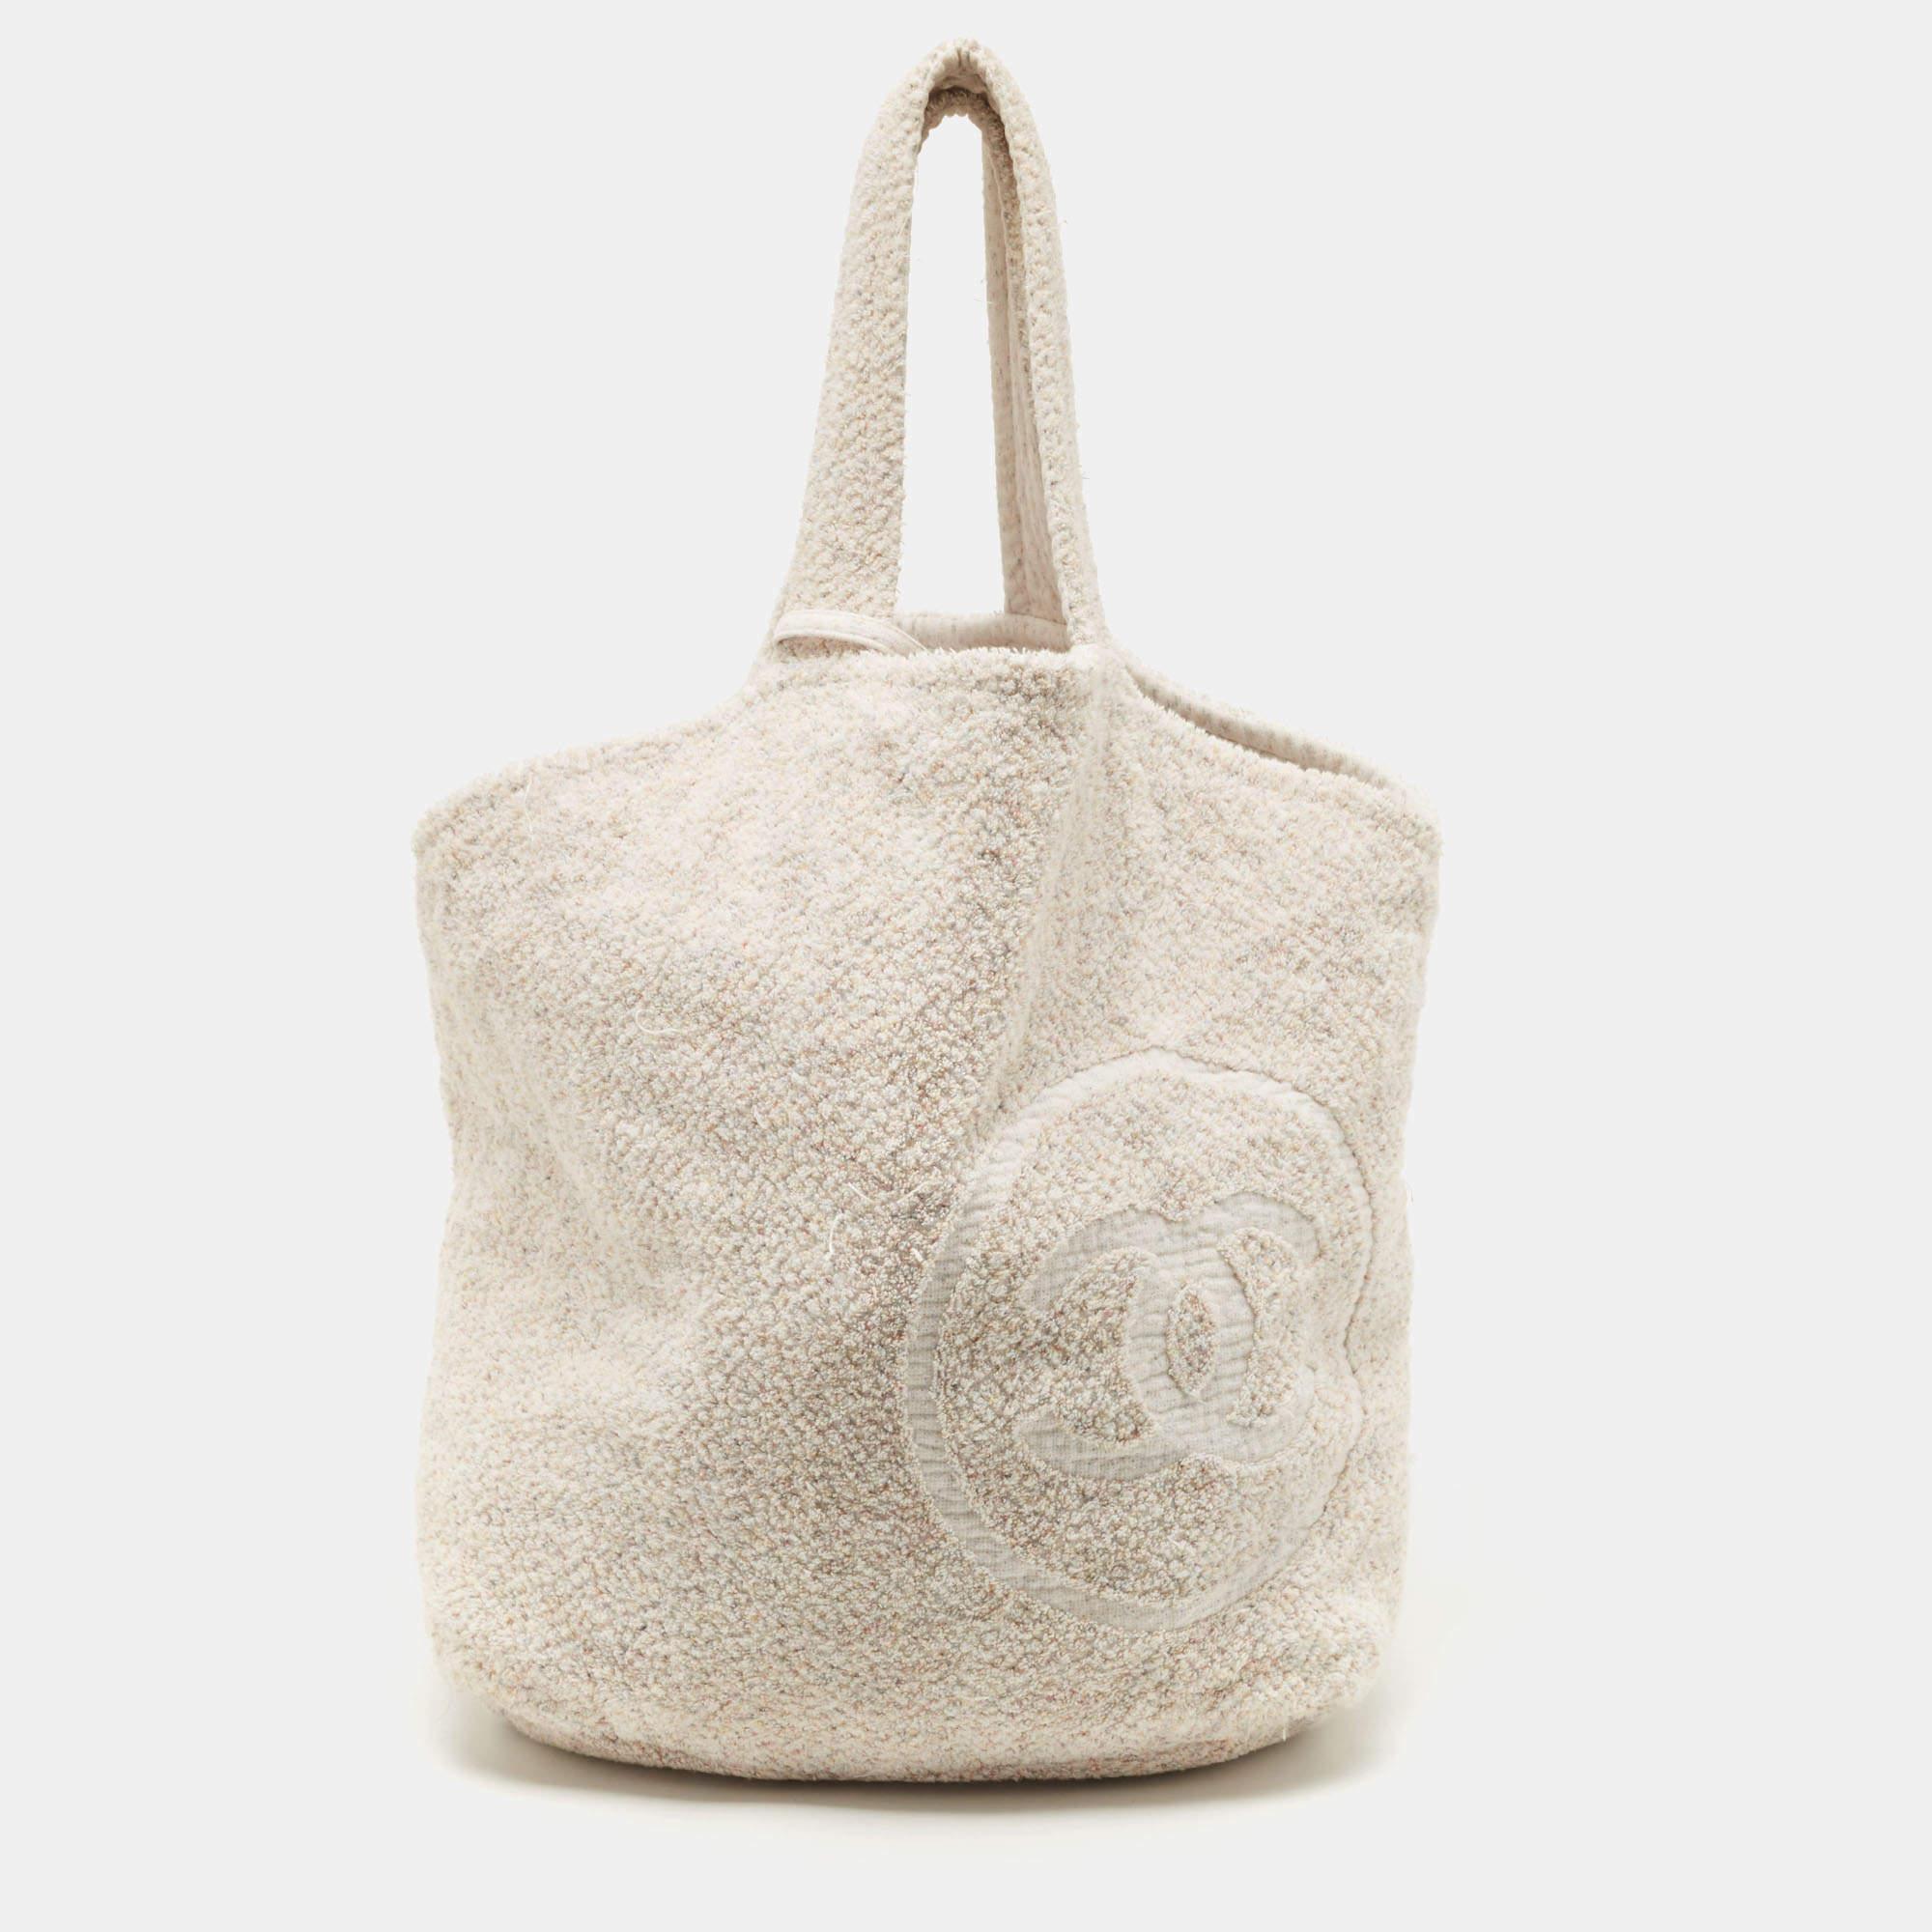 Get ready for a beach day in style with this Chanel beach bag and towel set. The large Chanel bag is made of cotton terrycloth and has two handles and a CC logo.

Includes: Pouch, Towel